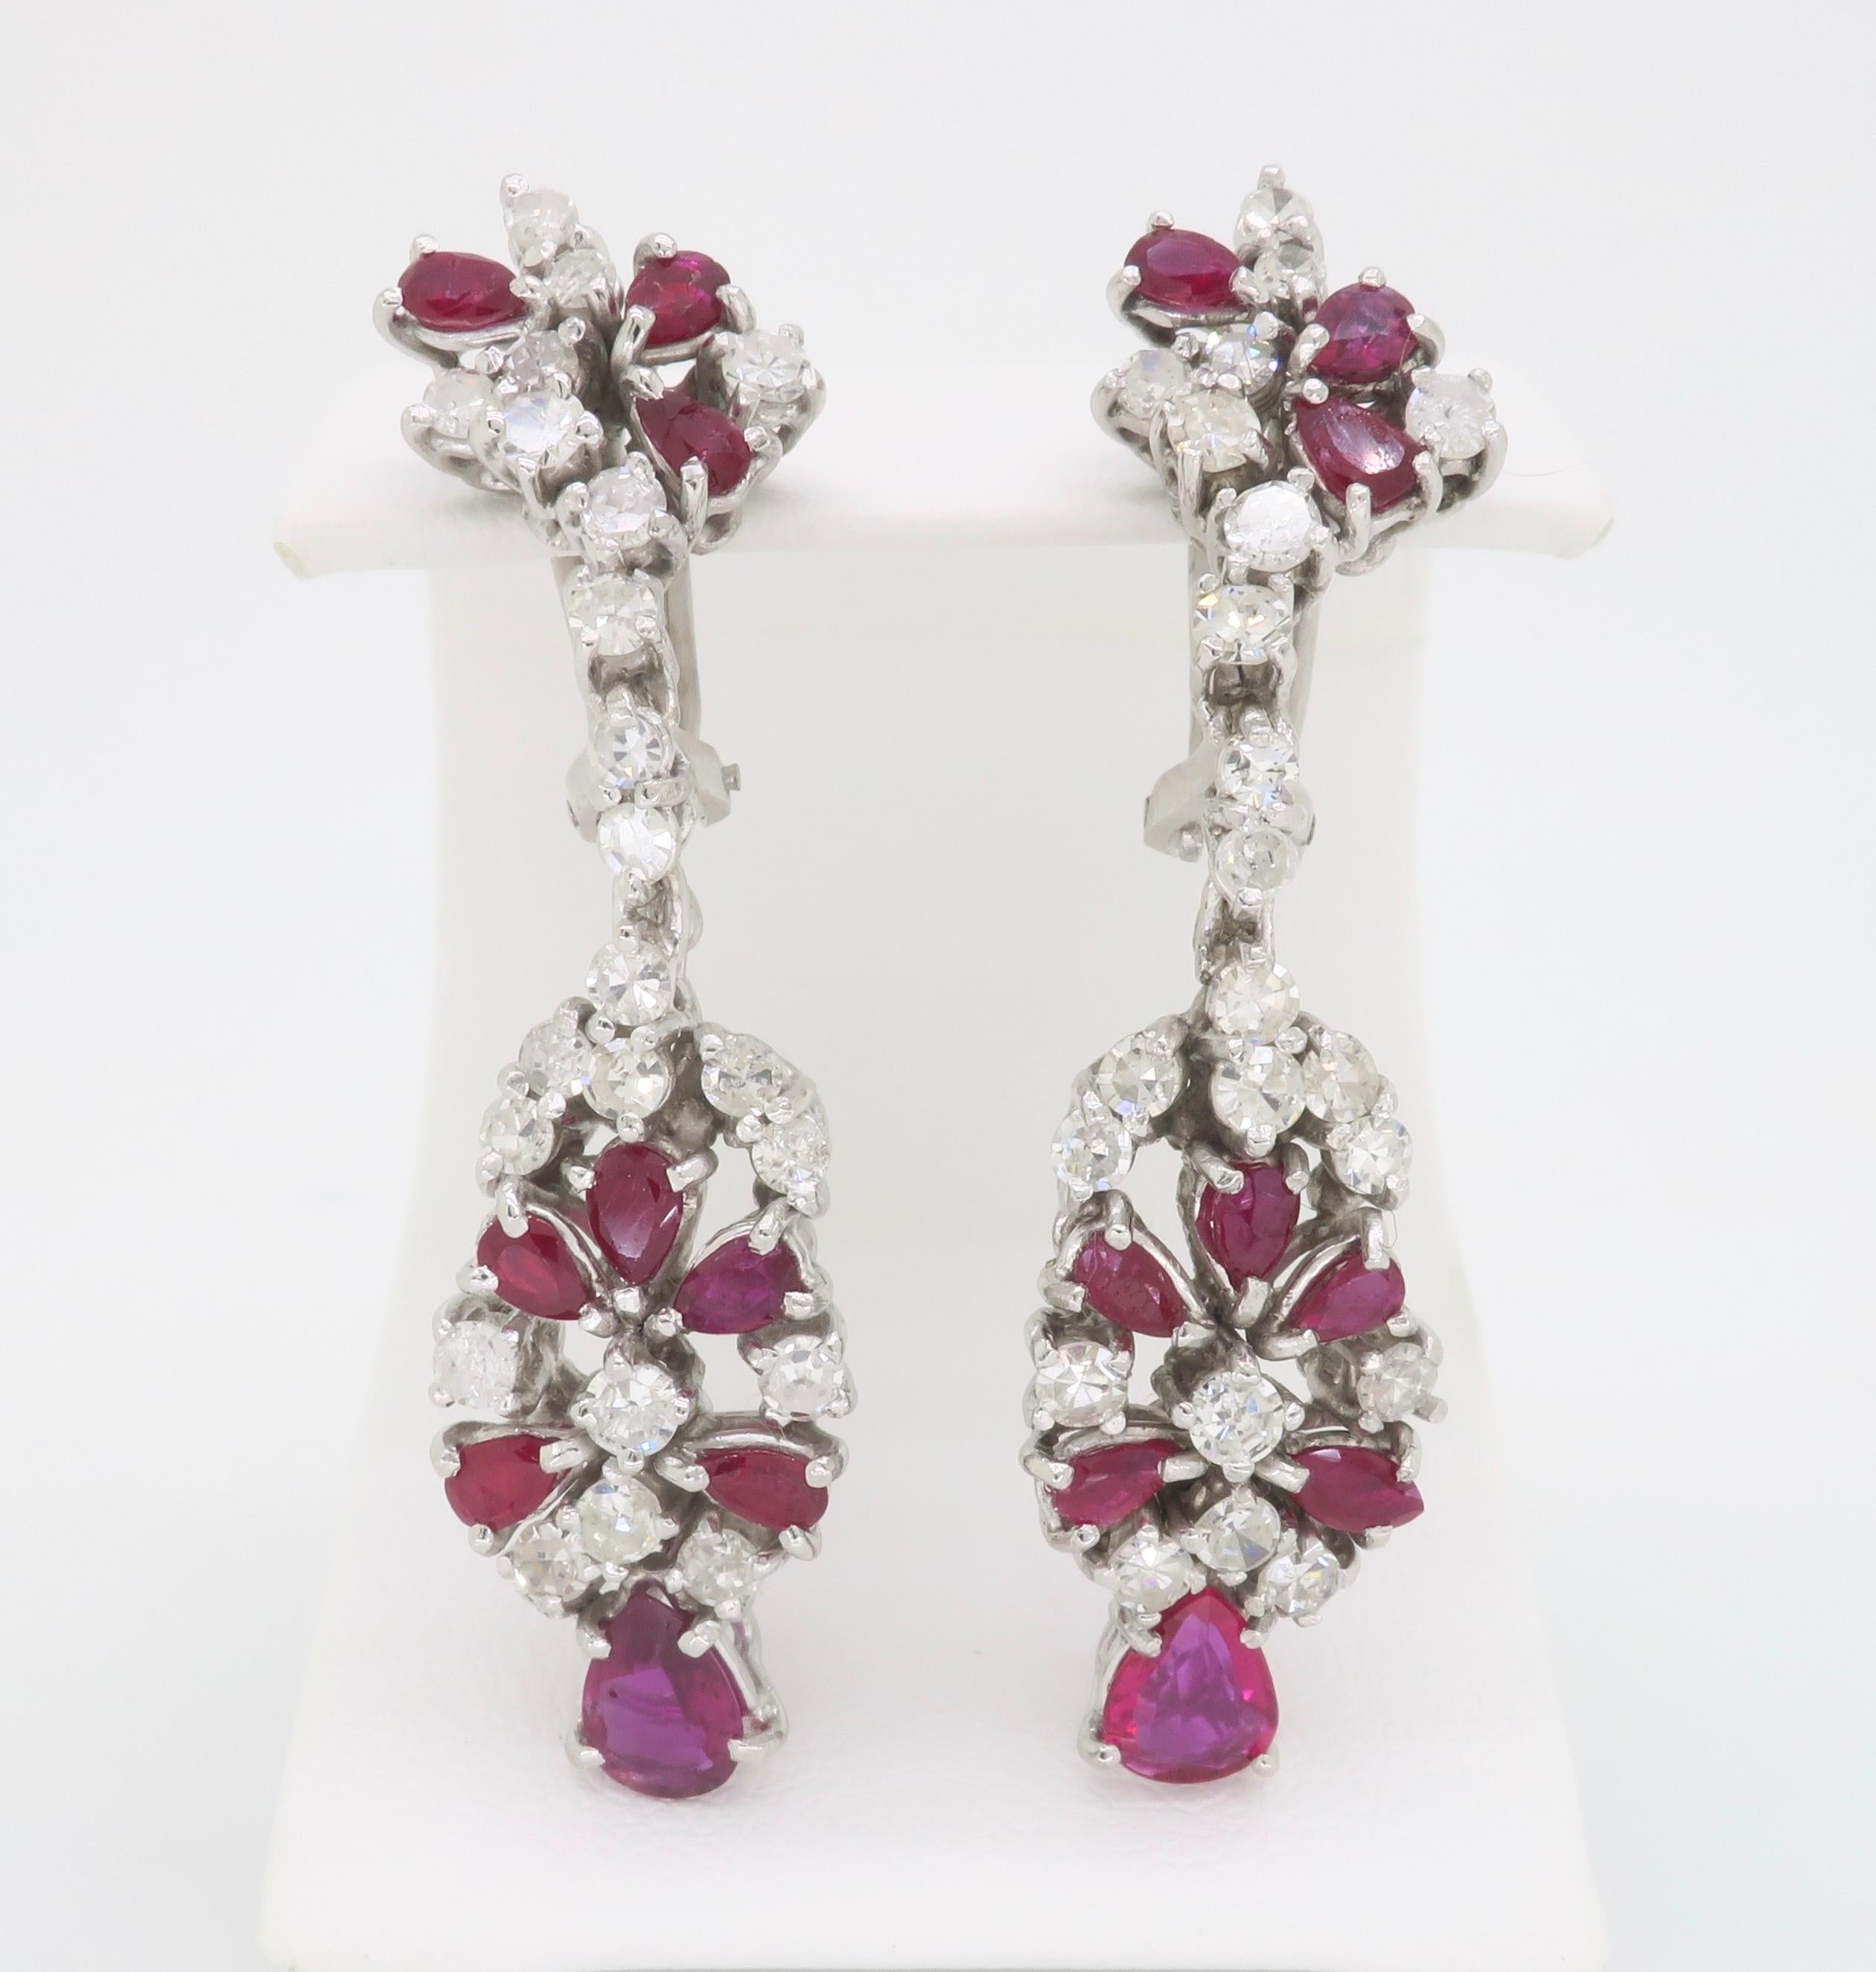 Ruby and Diamond Chandelier Drop Earrings Made in 18k White Gold In Excellent Condition For Sale In Webster, NY